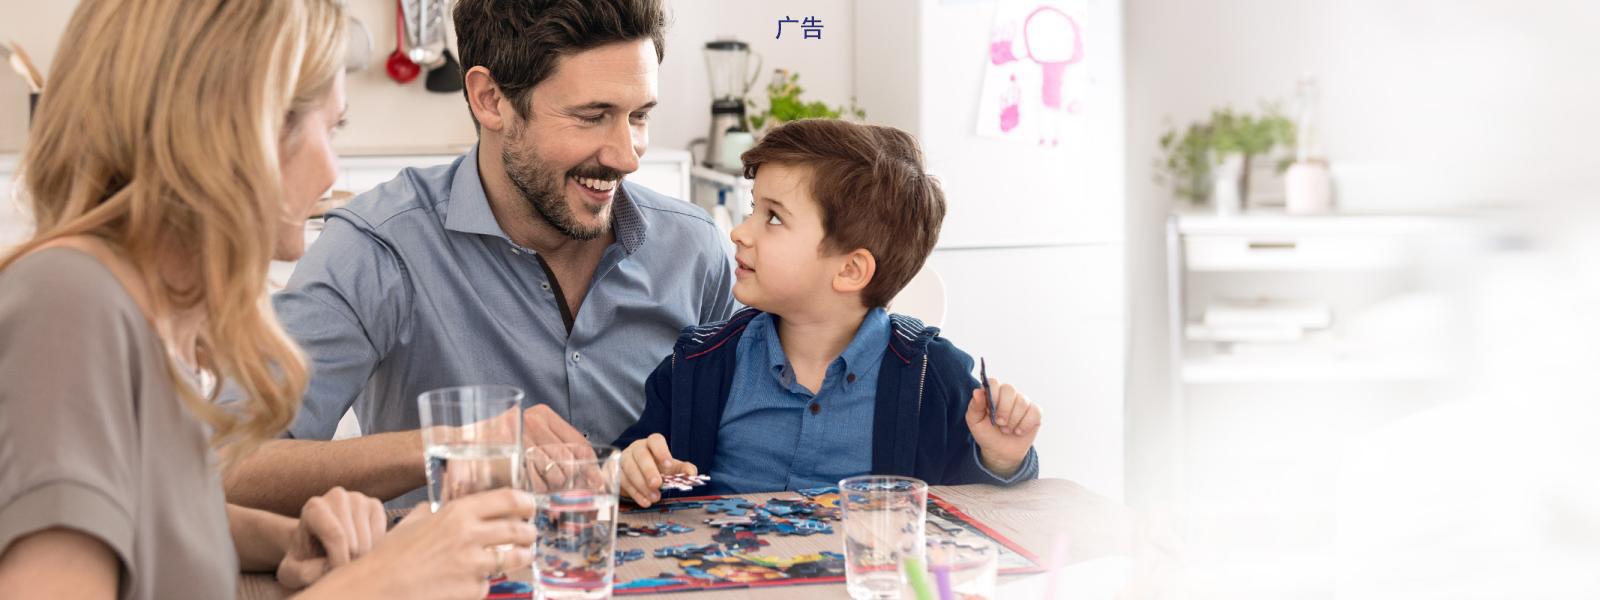 BRITA water filters and cartridges happy family